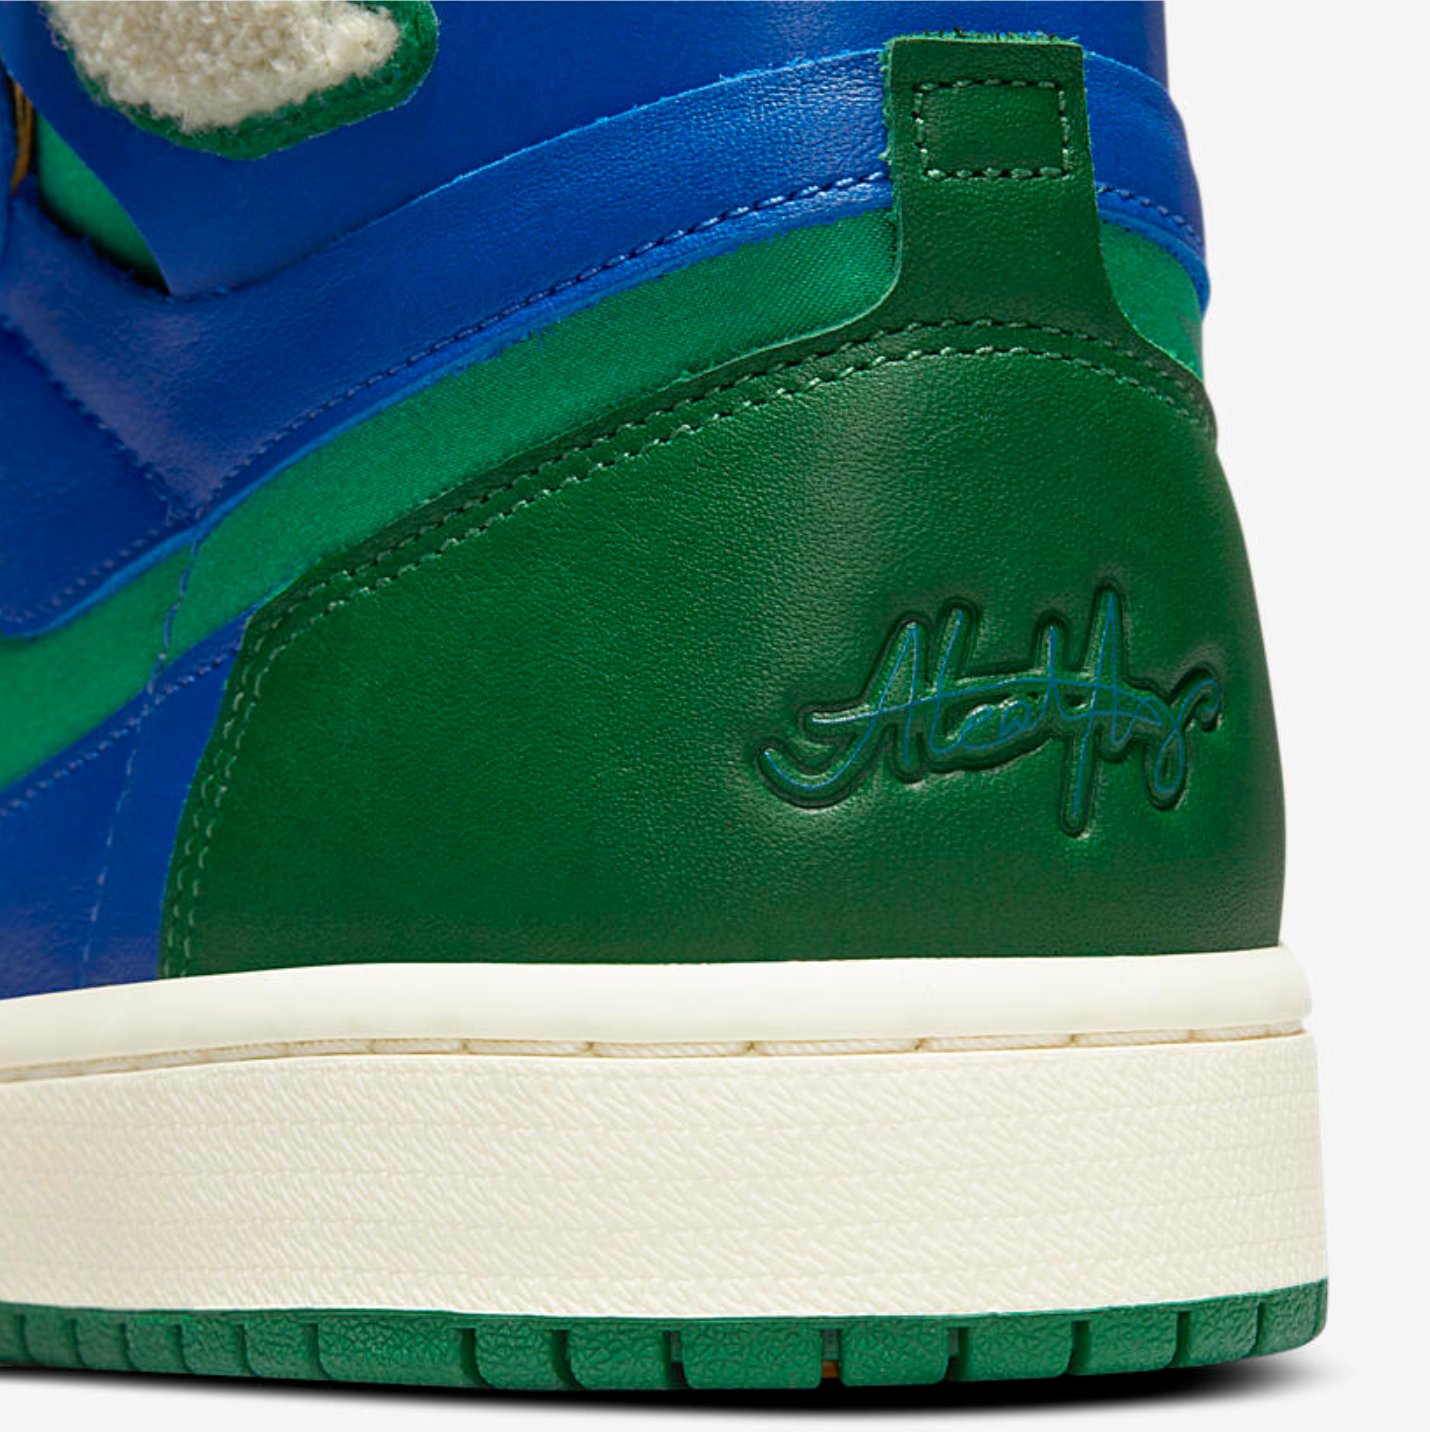 Air Jordan 1 And Aleali May Return With Green And Blue CMFT Silhouette ...